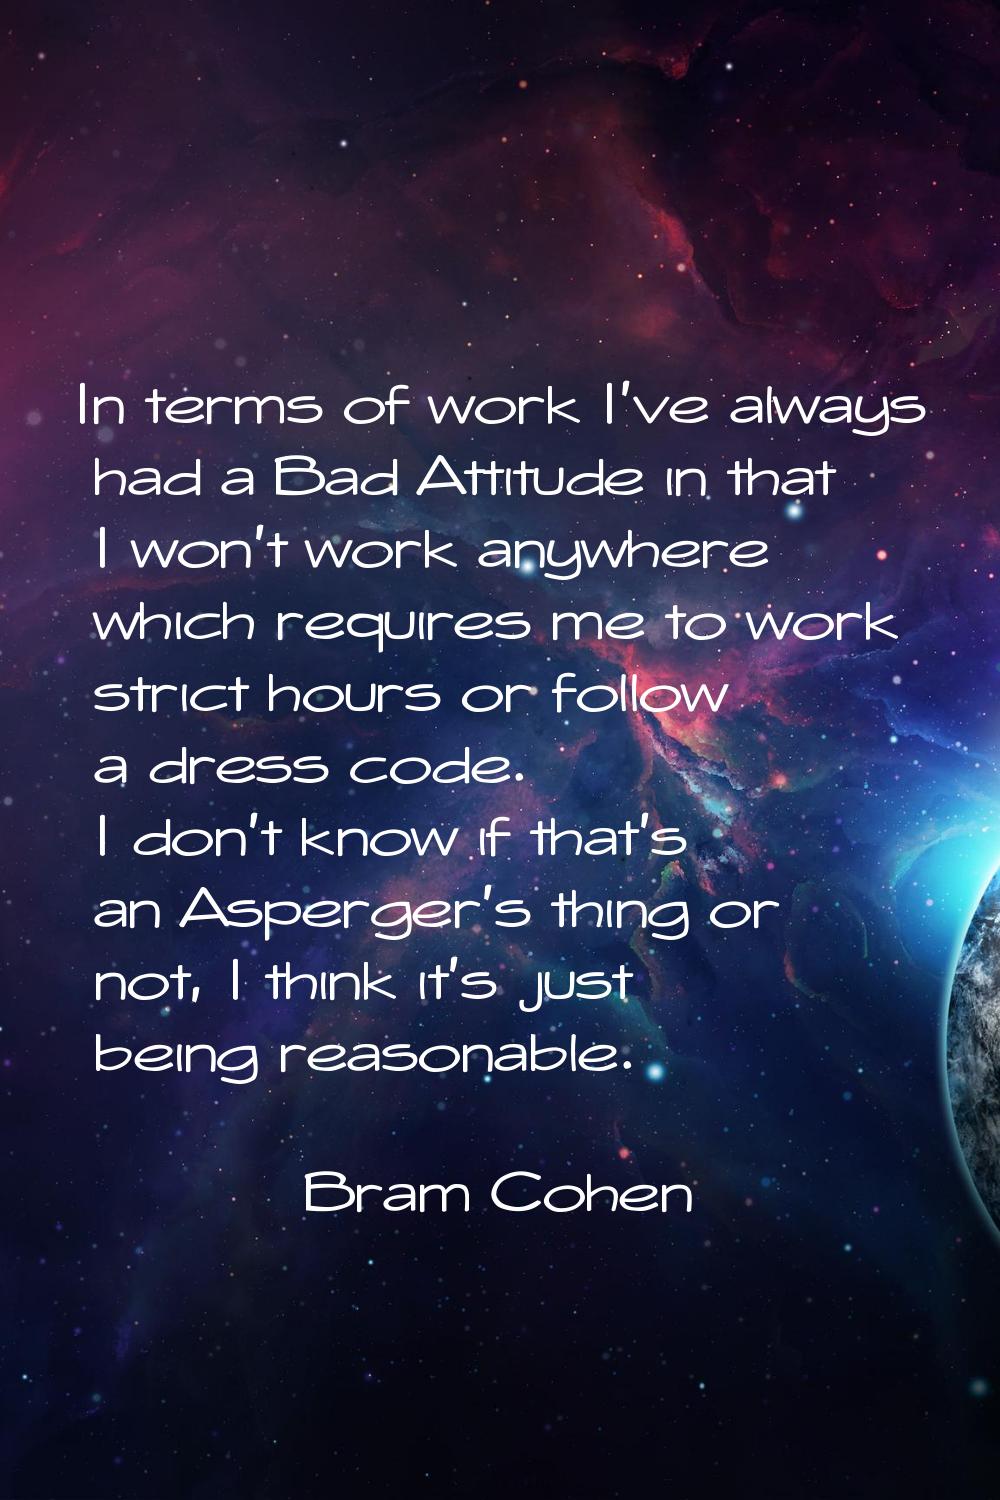 In terms of work I've always had a Bad Attitude in that I won't work anywhere which requires me to 